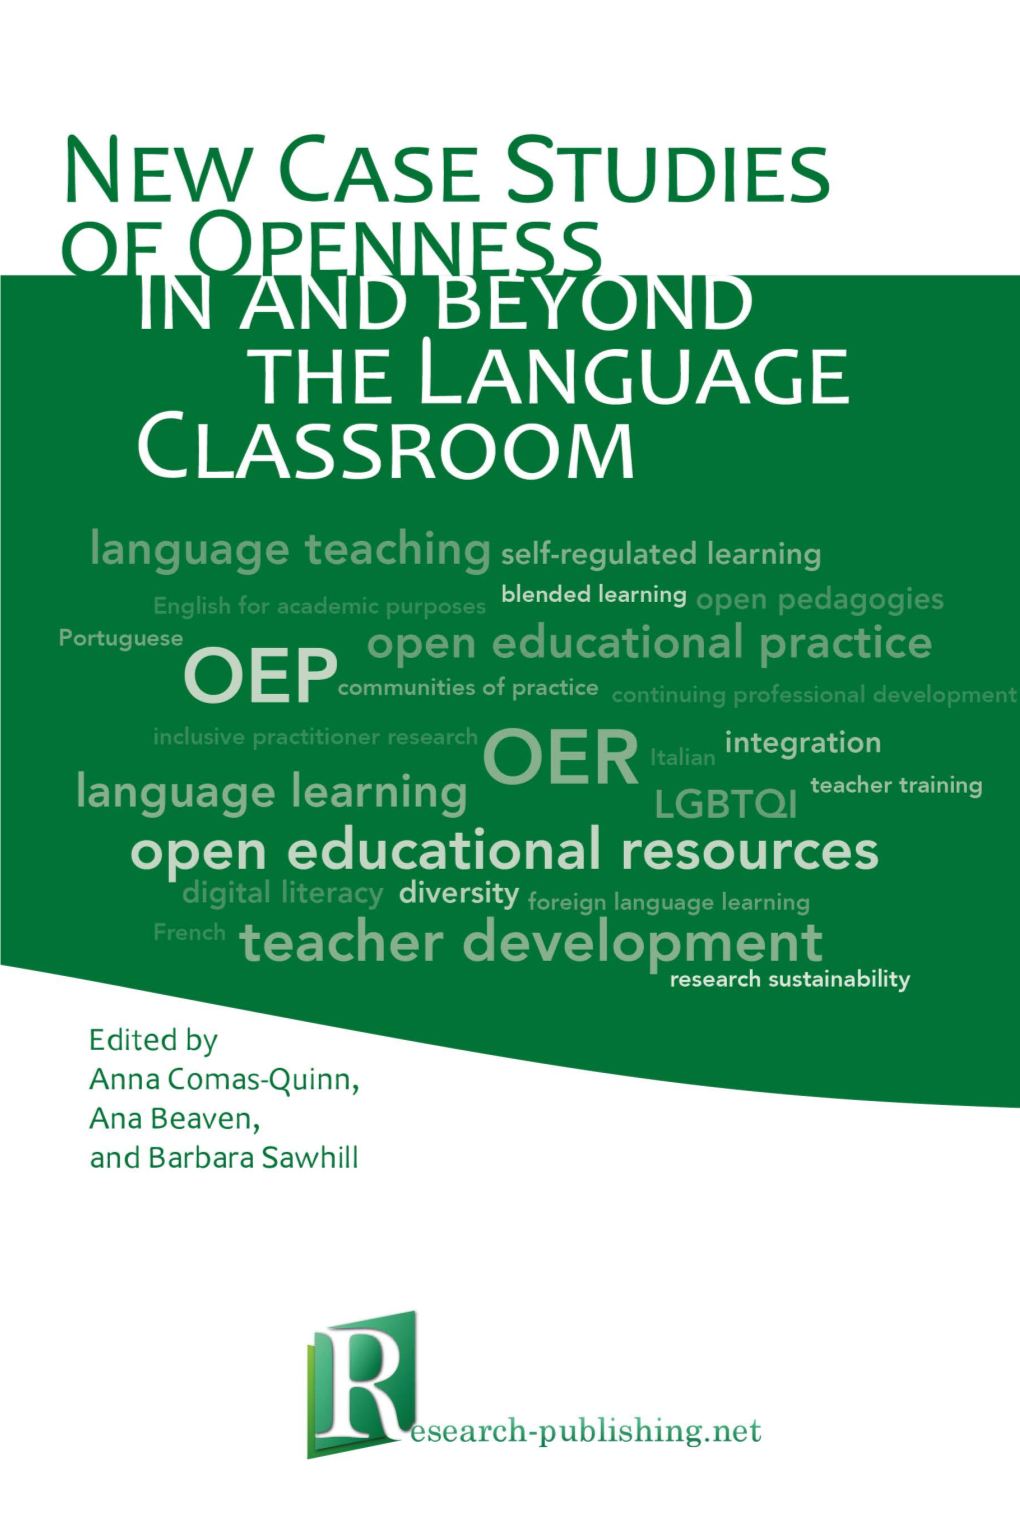 New Case Studies of Openness in and Beyond the Language Classroom